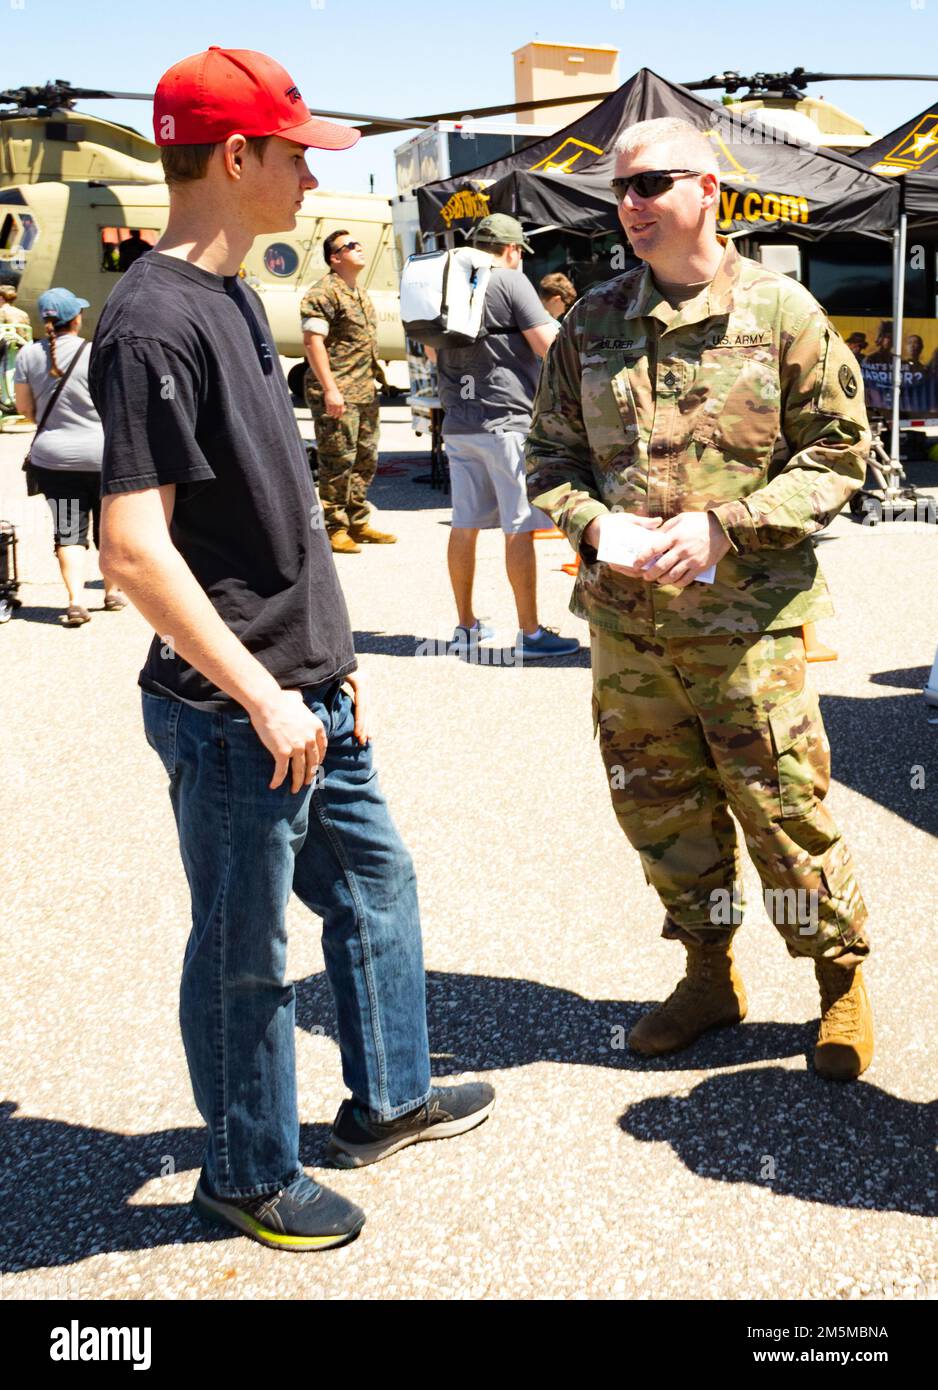 U.S. Army Staff Sgt. Bradley S. Ulmer, an instructor assigned to 8th Battalion, 5th Brigade, 94th Training Division, 80th Training Command, speaks with a young adult about the benefits of serving in the U.S. Army during the Tampa Bay Airfest in MacDill Air Force Base March 25, 2022. Ulmer, an Army Reserve Soldier hailing from Cookeville, Tennessee, was one of dozens of Soldiers who helped set up and operate the Airfest’s Army Village that featured a myriad of modern and historical Army vehicles, helicopters and airborne equipment. The static and interactive displays attracted thousands of visi Stock Photo